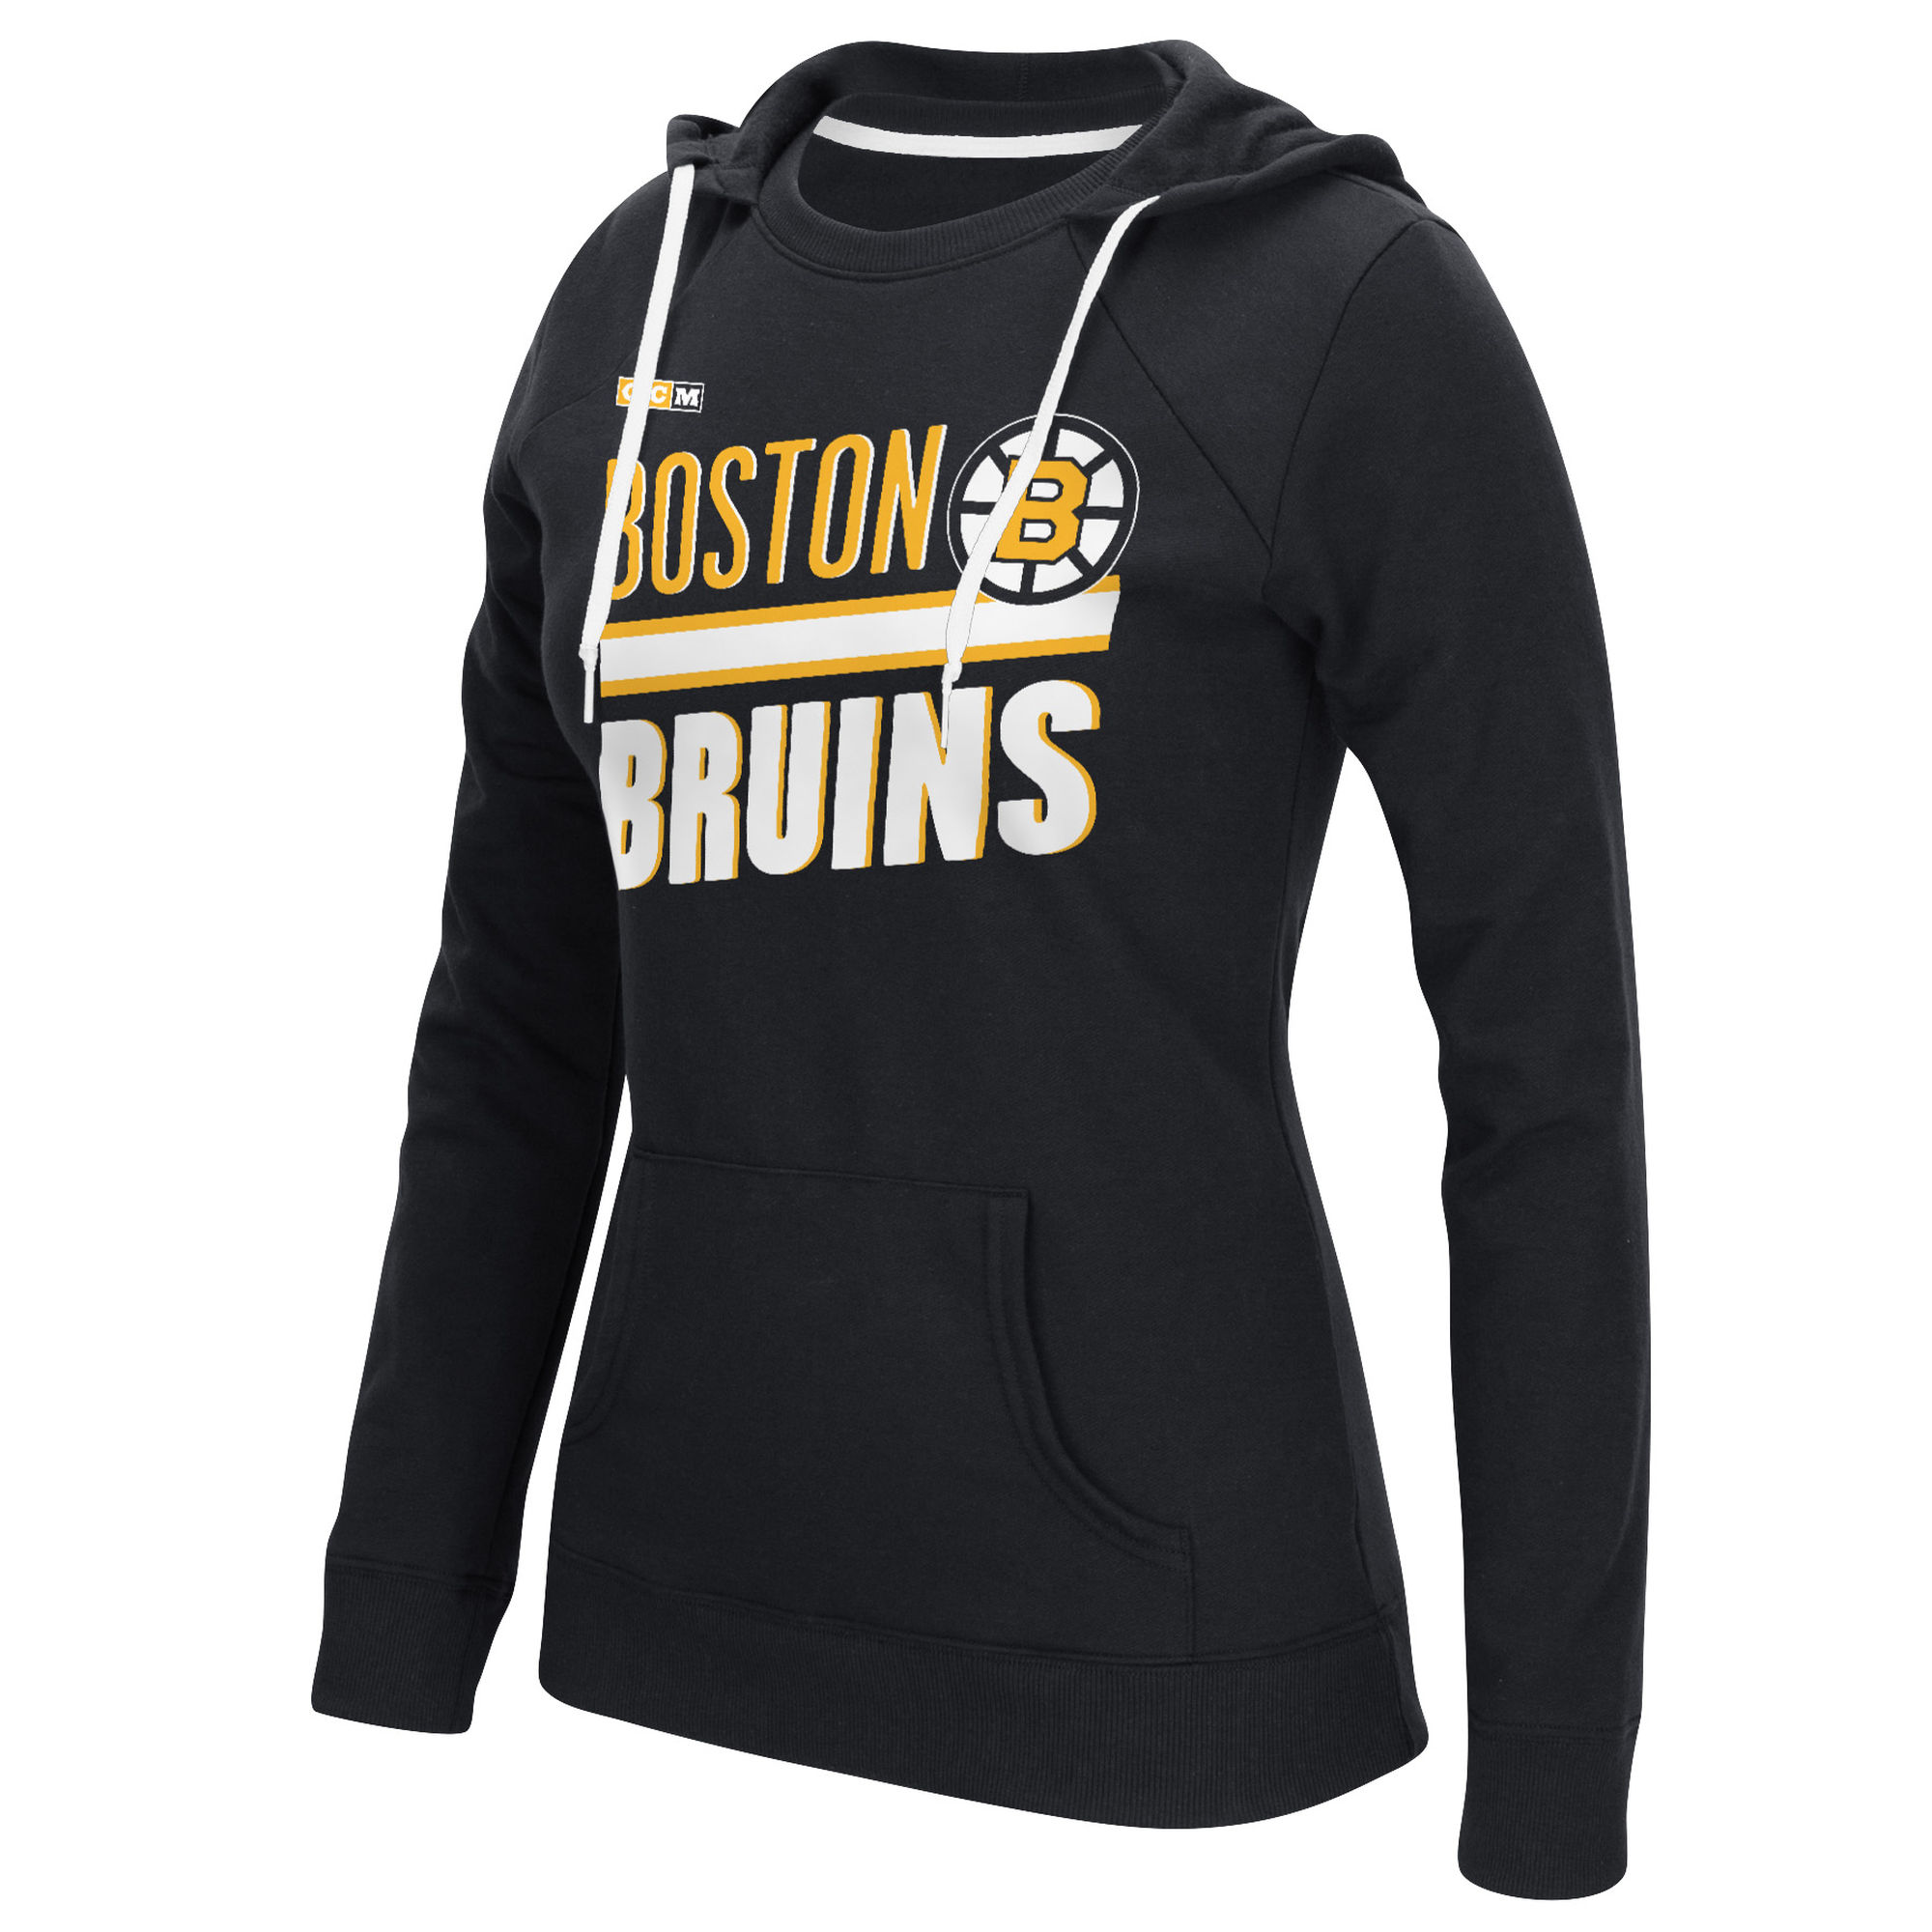 Bruins Black CCM Women's Customized All Stitched Hooded Sweatshirt